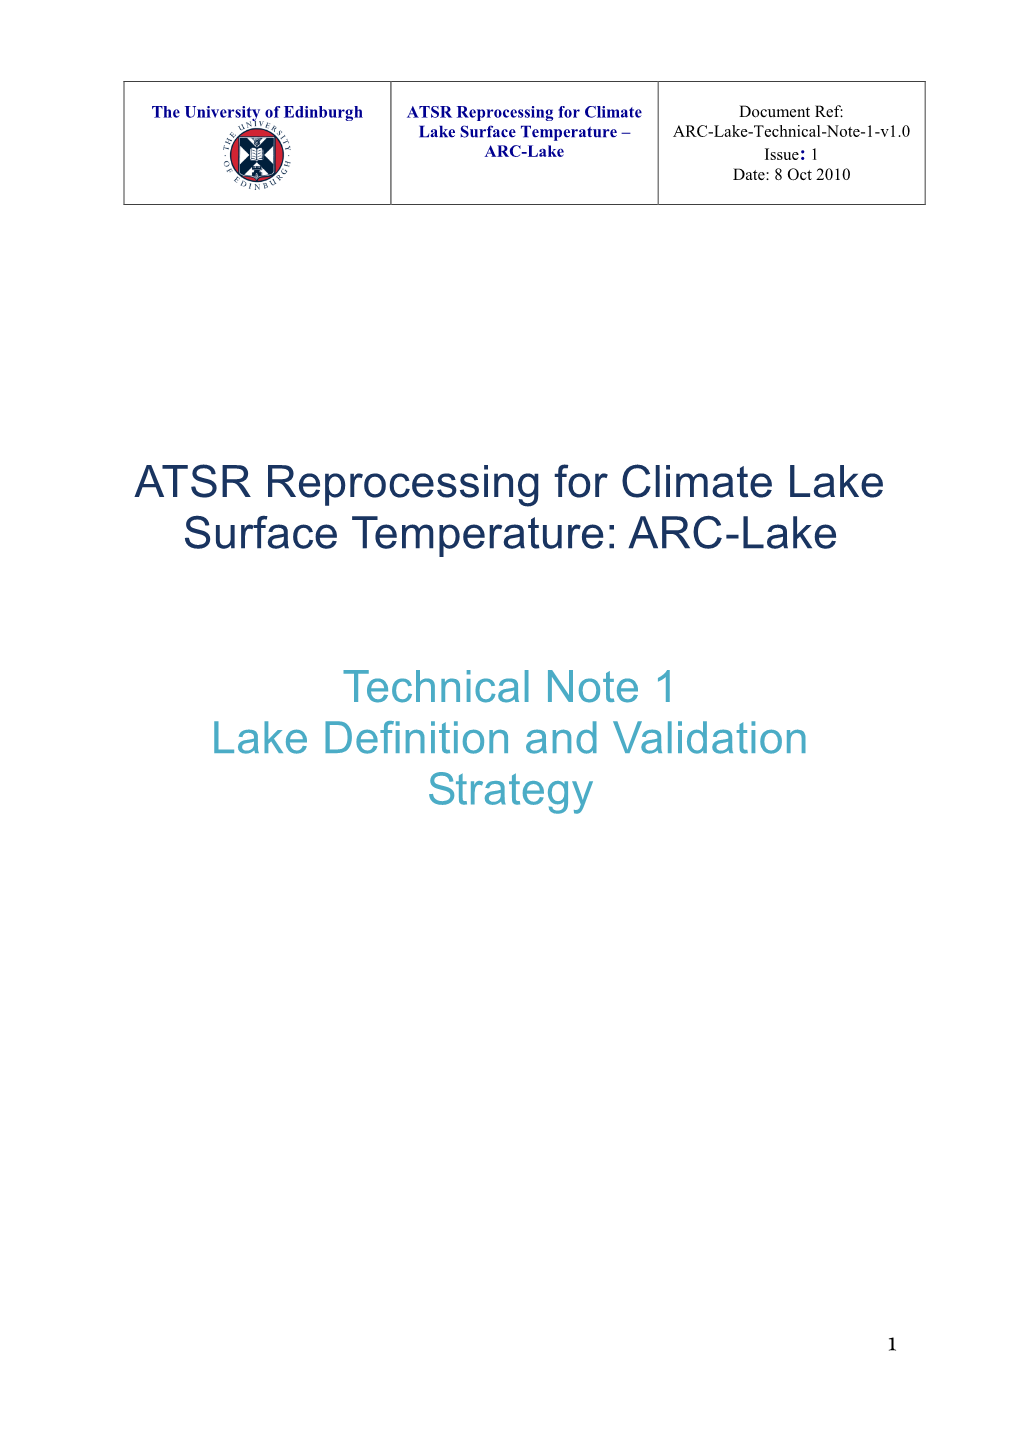 Technical Note 1: Lake Definition and Validation Strategy